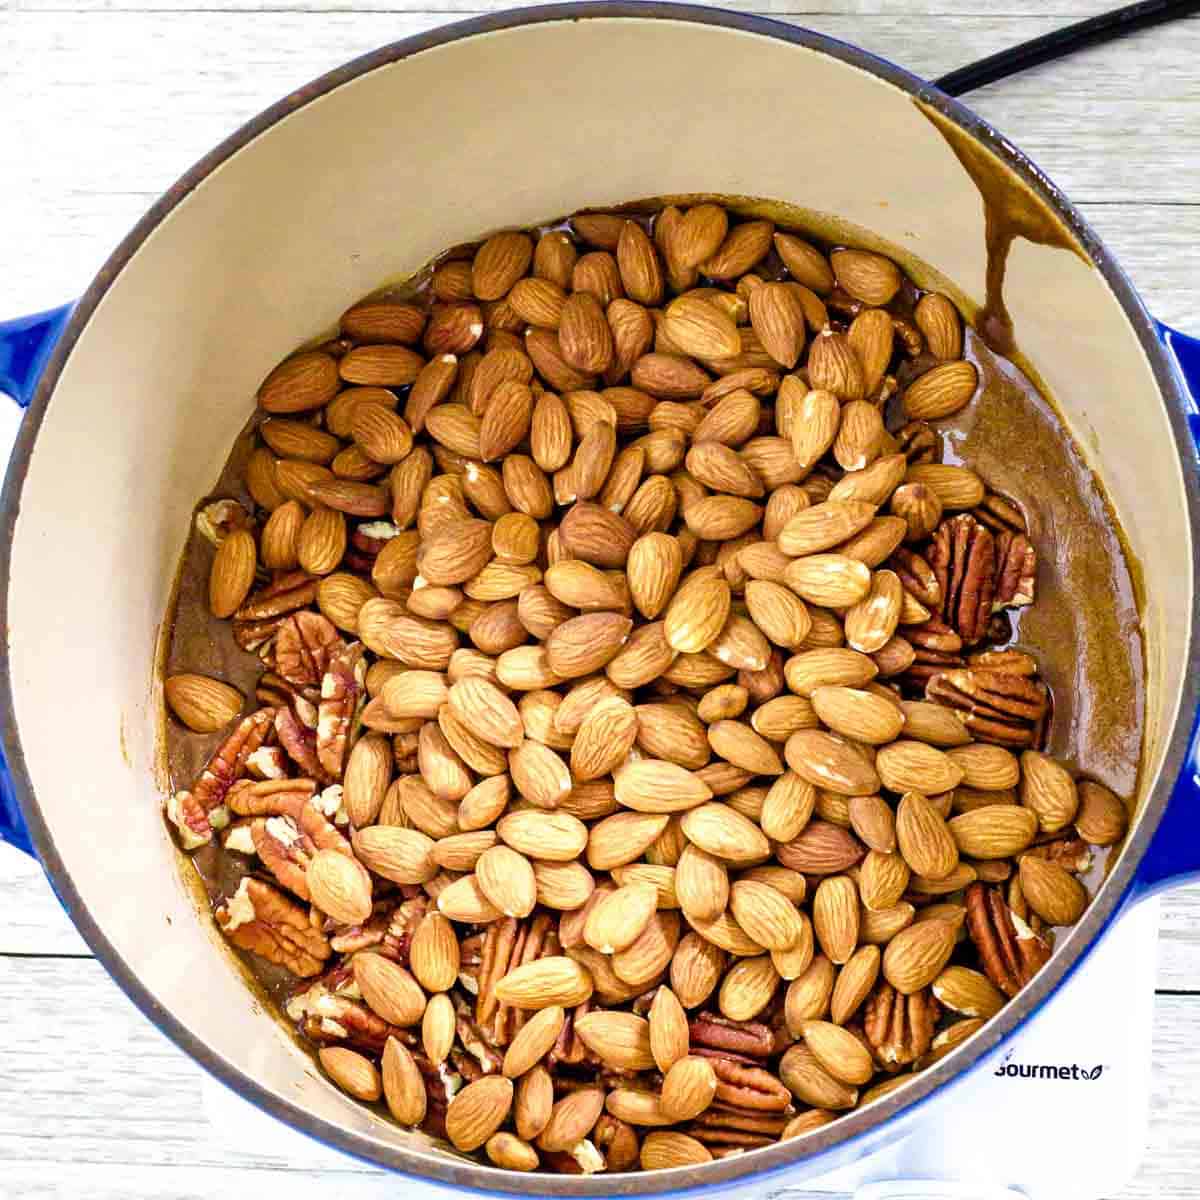 almonds and pecans poured into the pan